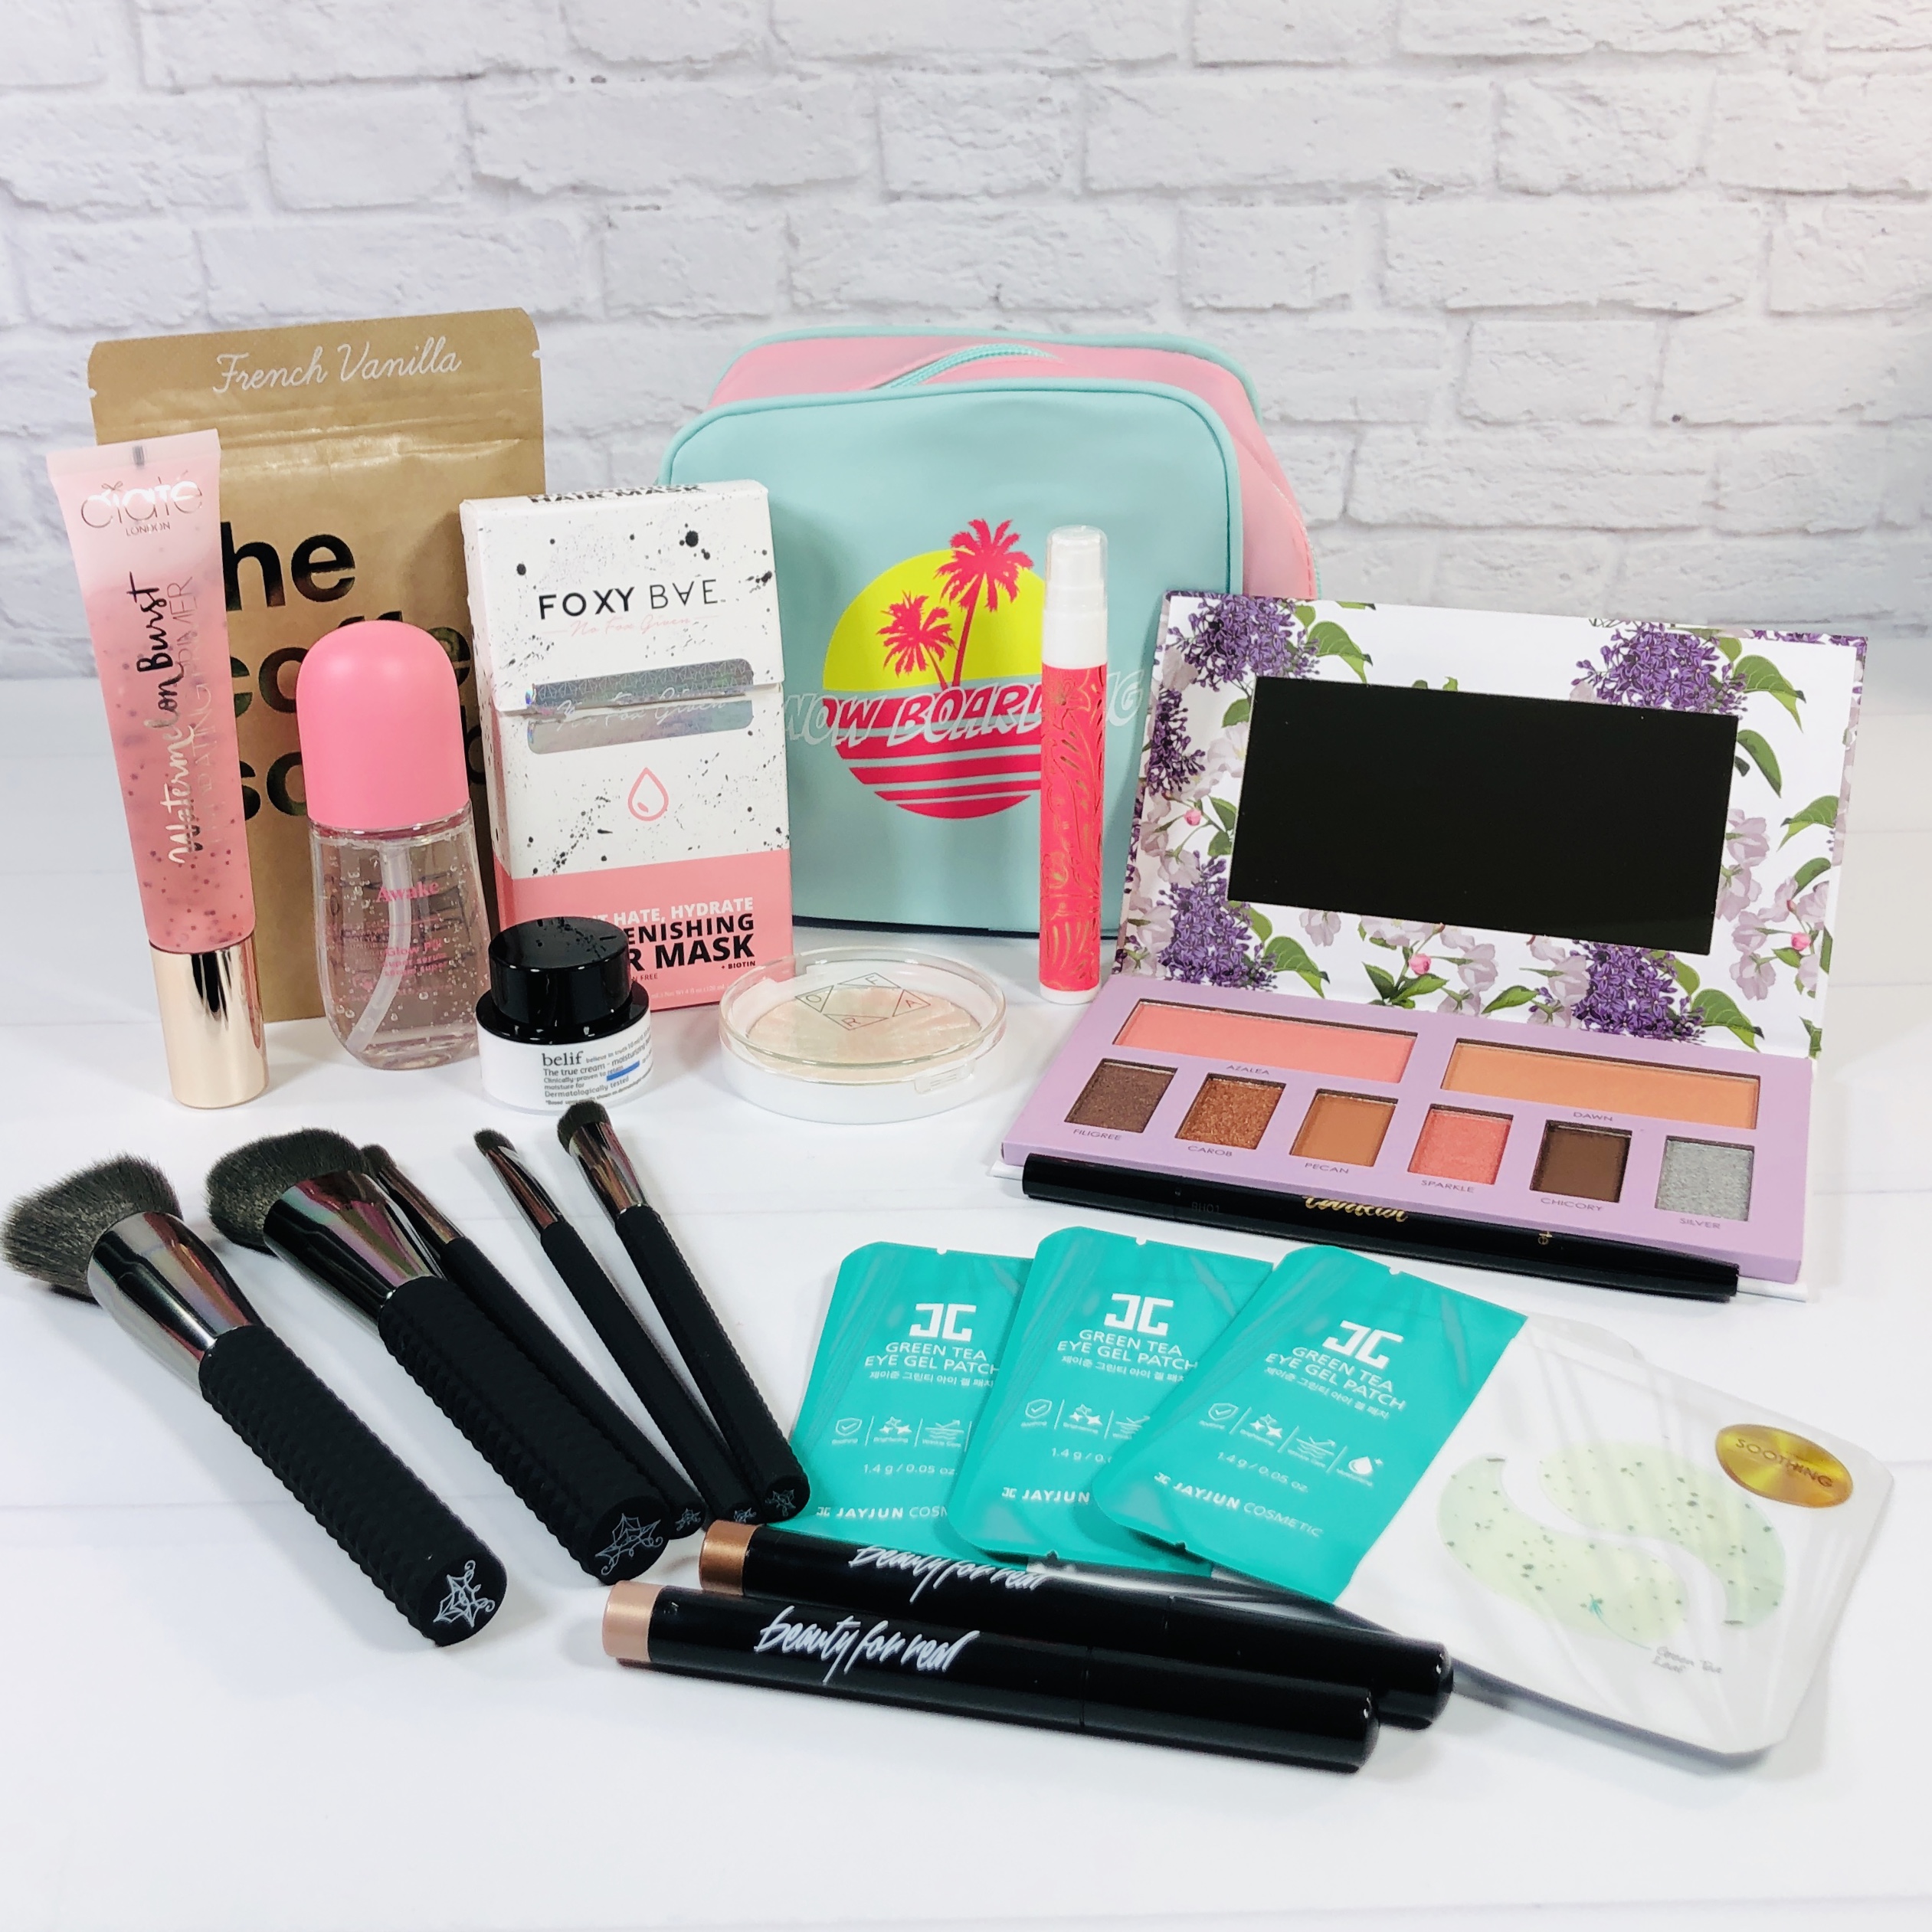 https://hellosubscription.com/wp-content/uploads/2020/08/ipsy-ultimate-july-2020-44.jpg?quality=90&strip=all